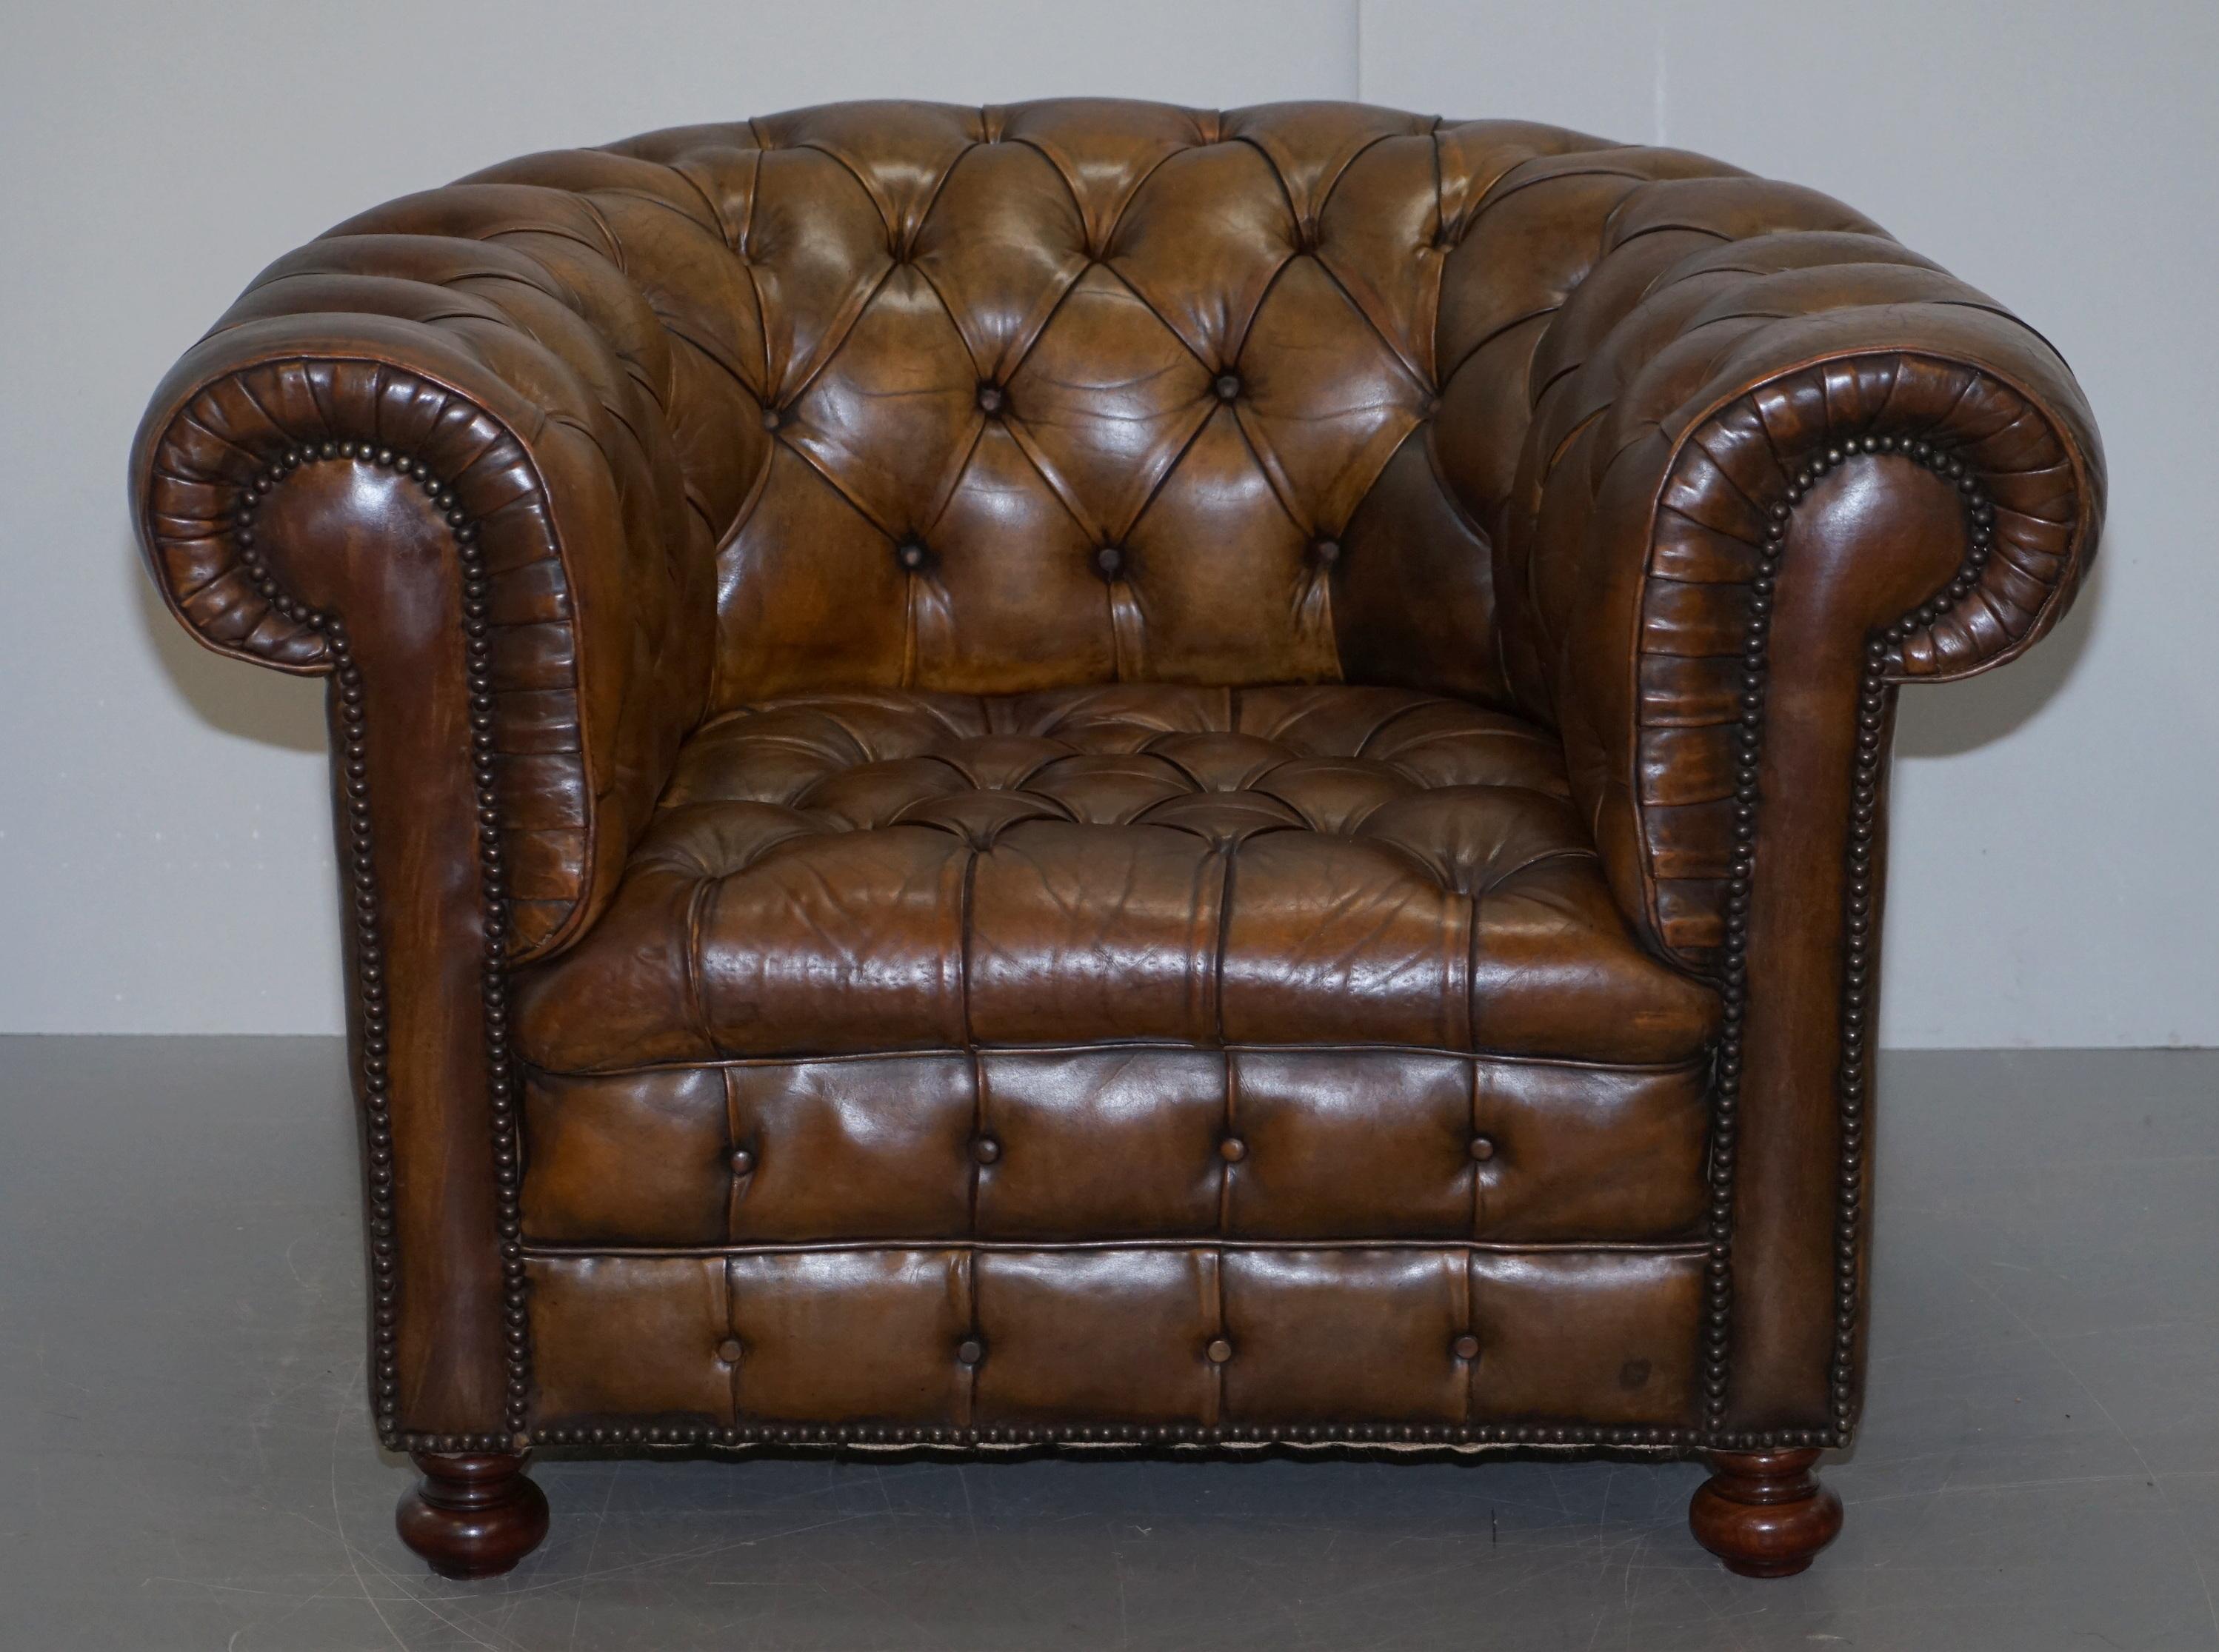 We are delighted to offer for sale this lovely original circa 1940s hand dyed cigar brown leather Chesterfield fully buttoned club armchair

A good looking and iconic piece of English furniture. Known the world over as one of the most